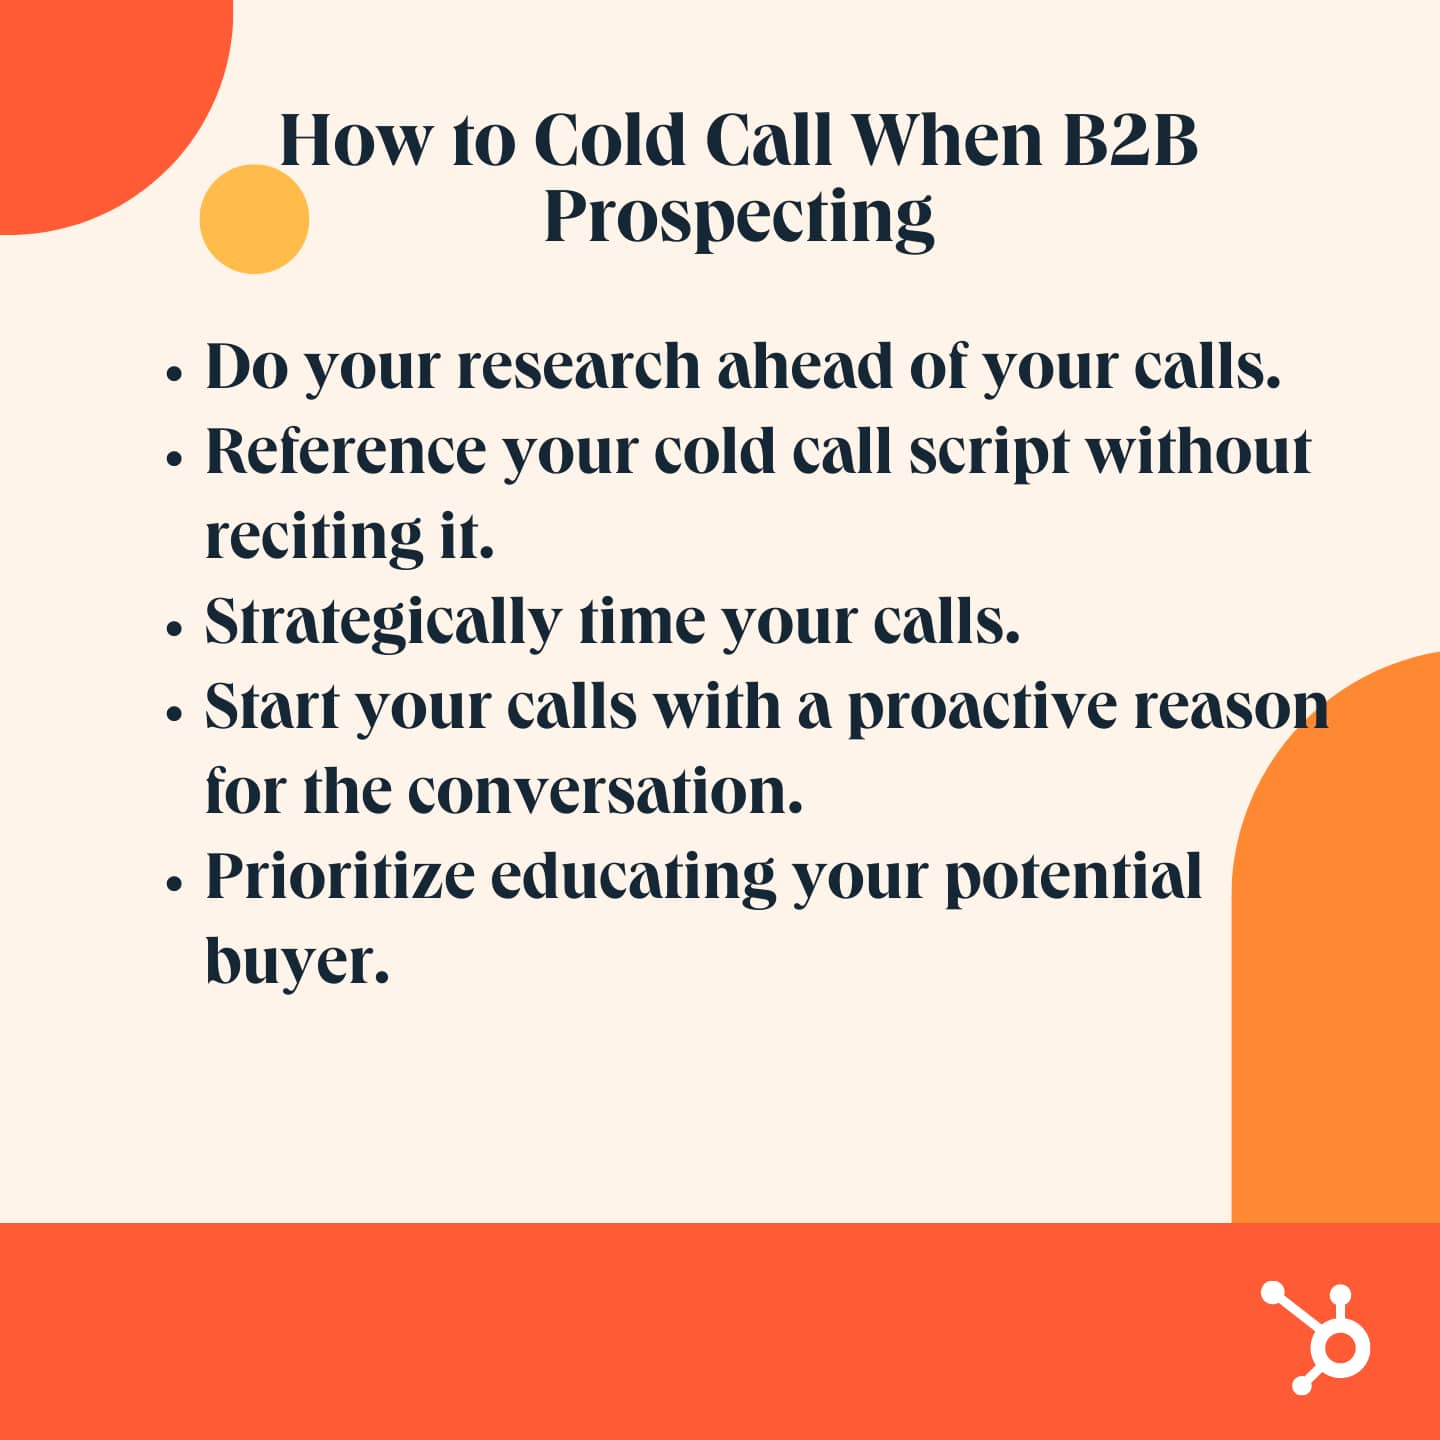 a quick guide exploring the b2b prospecting method of cold calling effectively